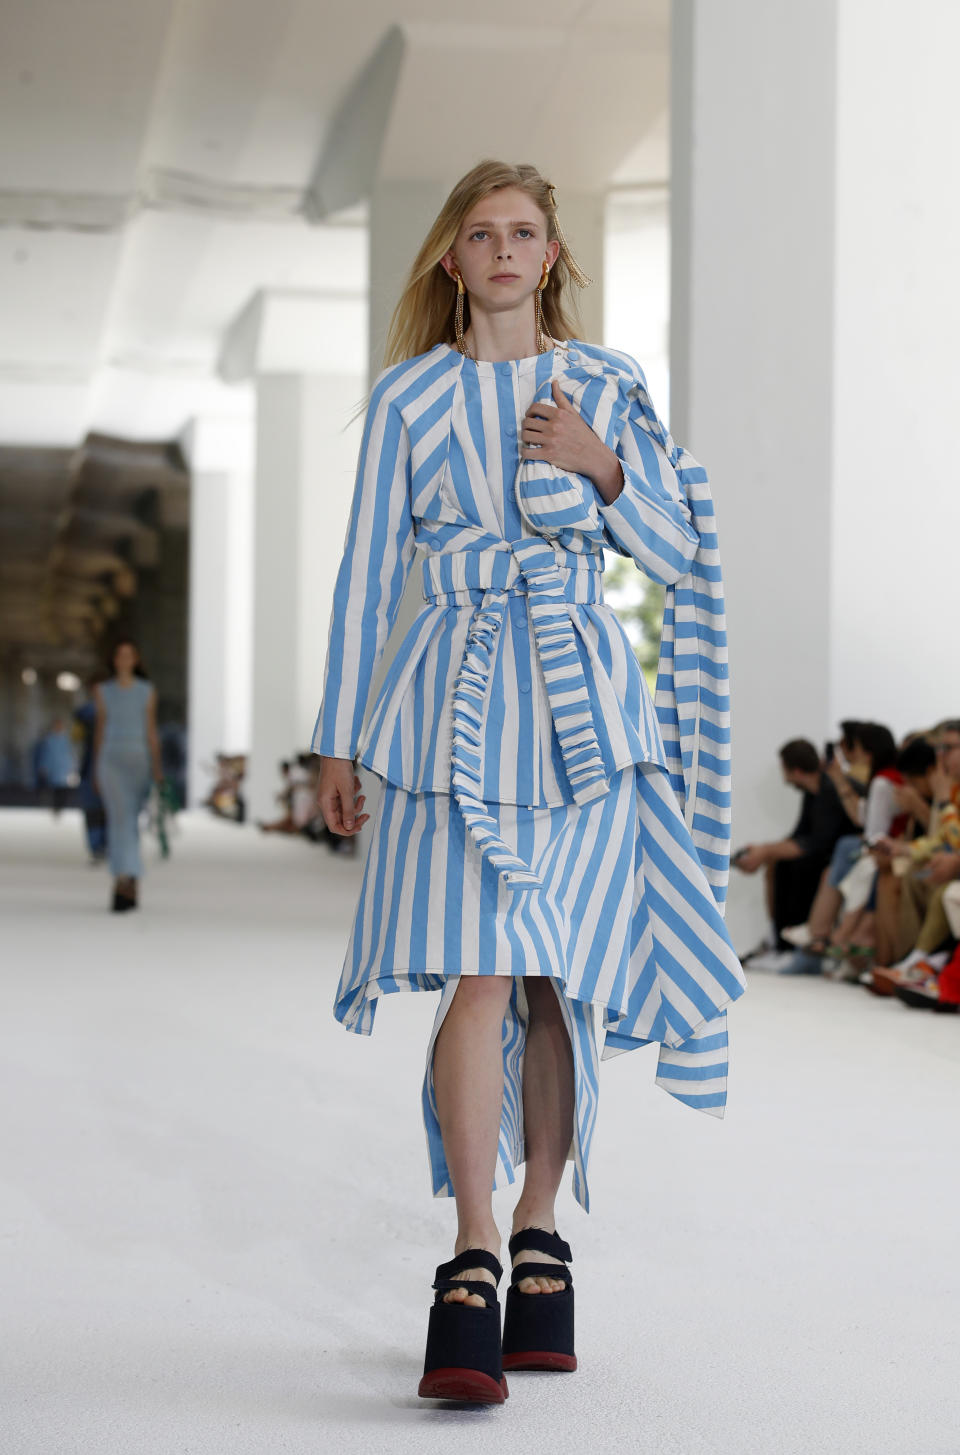 A model wears a creation as part of the Sunnei men's Spring-Summer 2020 collection, unveiled during the fashion week in Milan, Italy, Sunday, June 16, 2019. (AP Photo/Antonio Calanni)